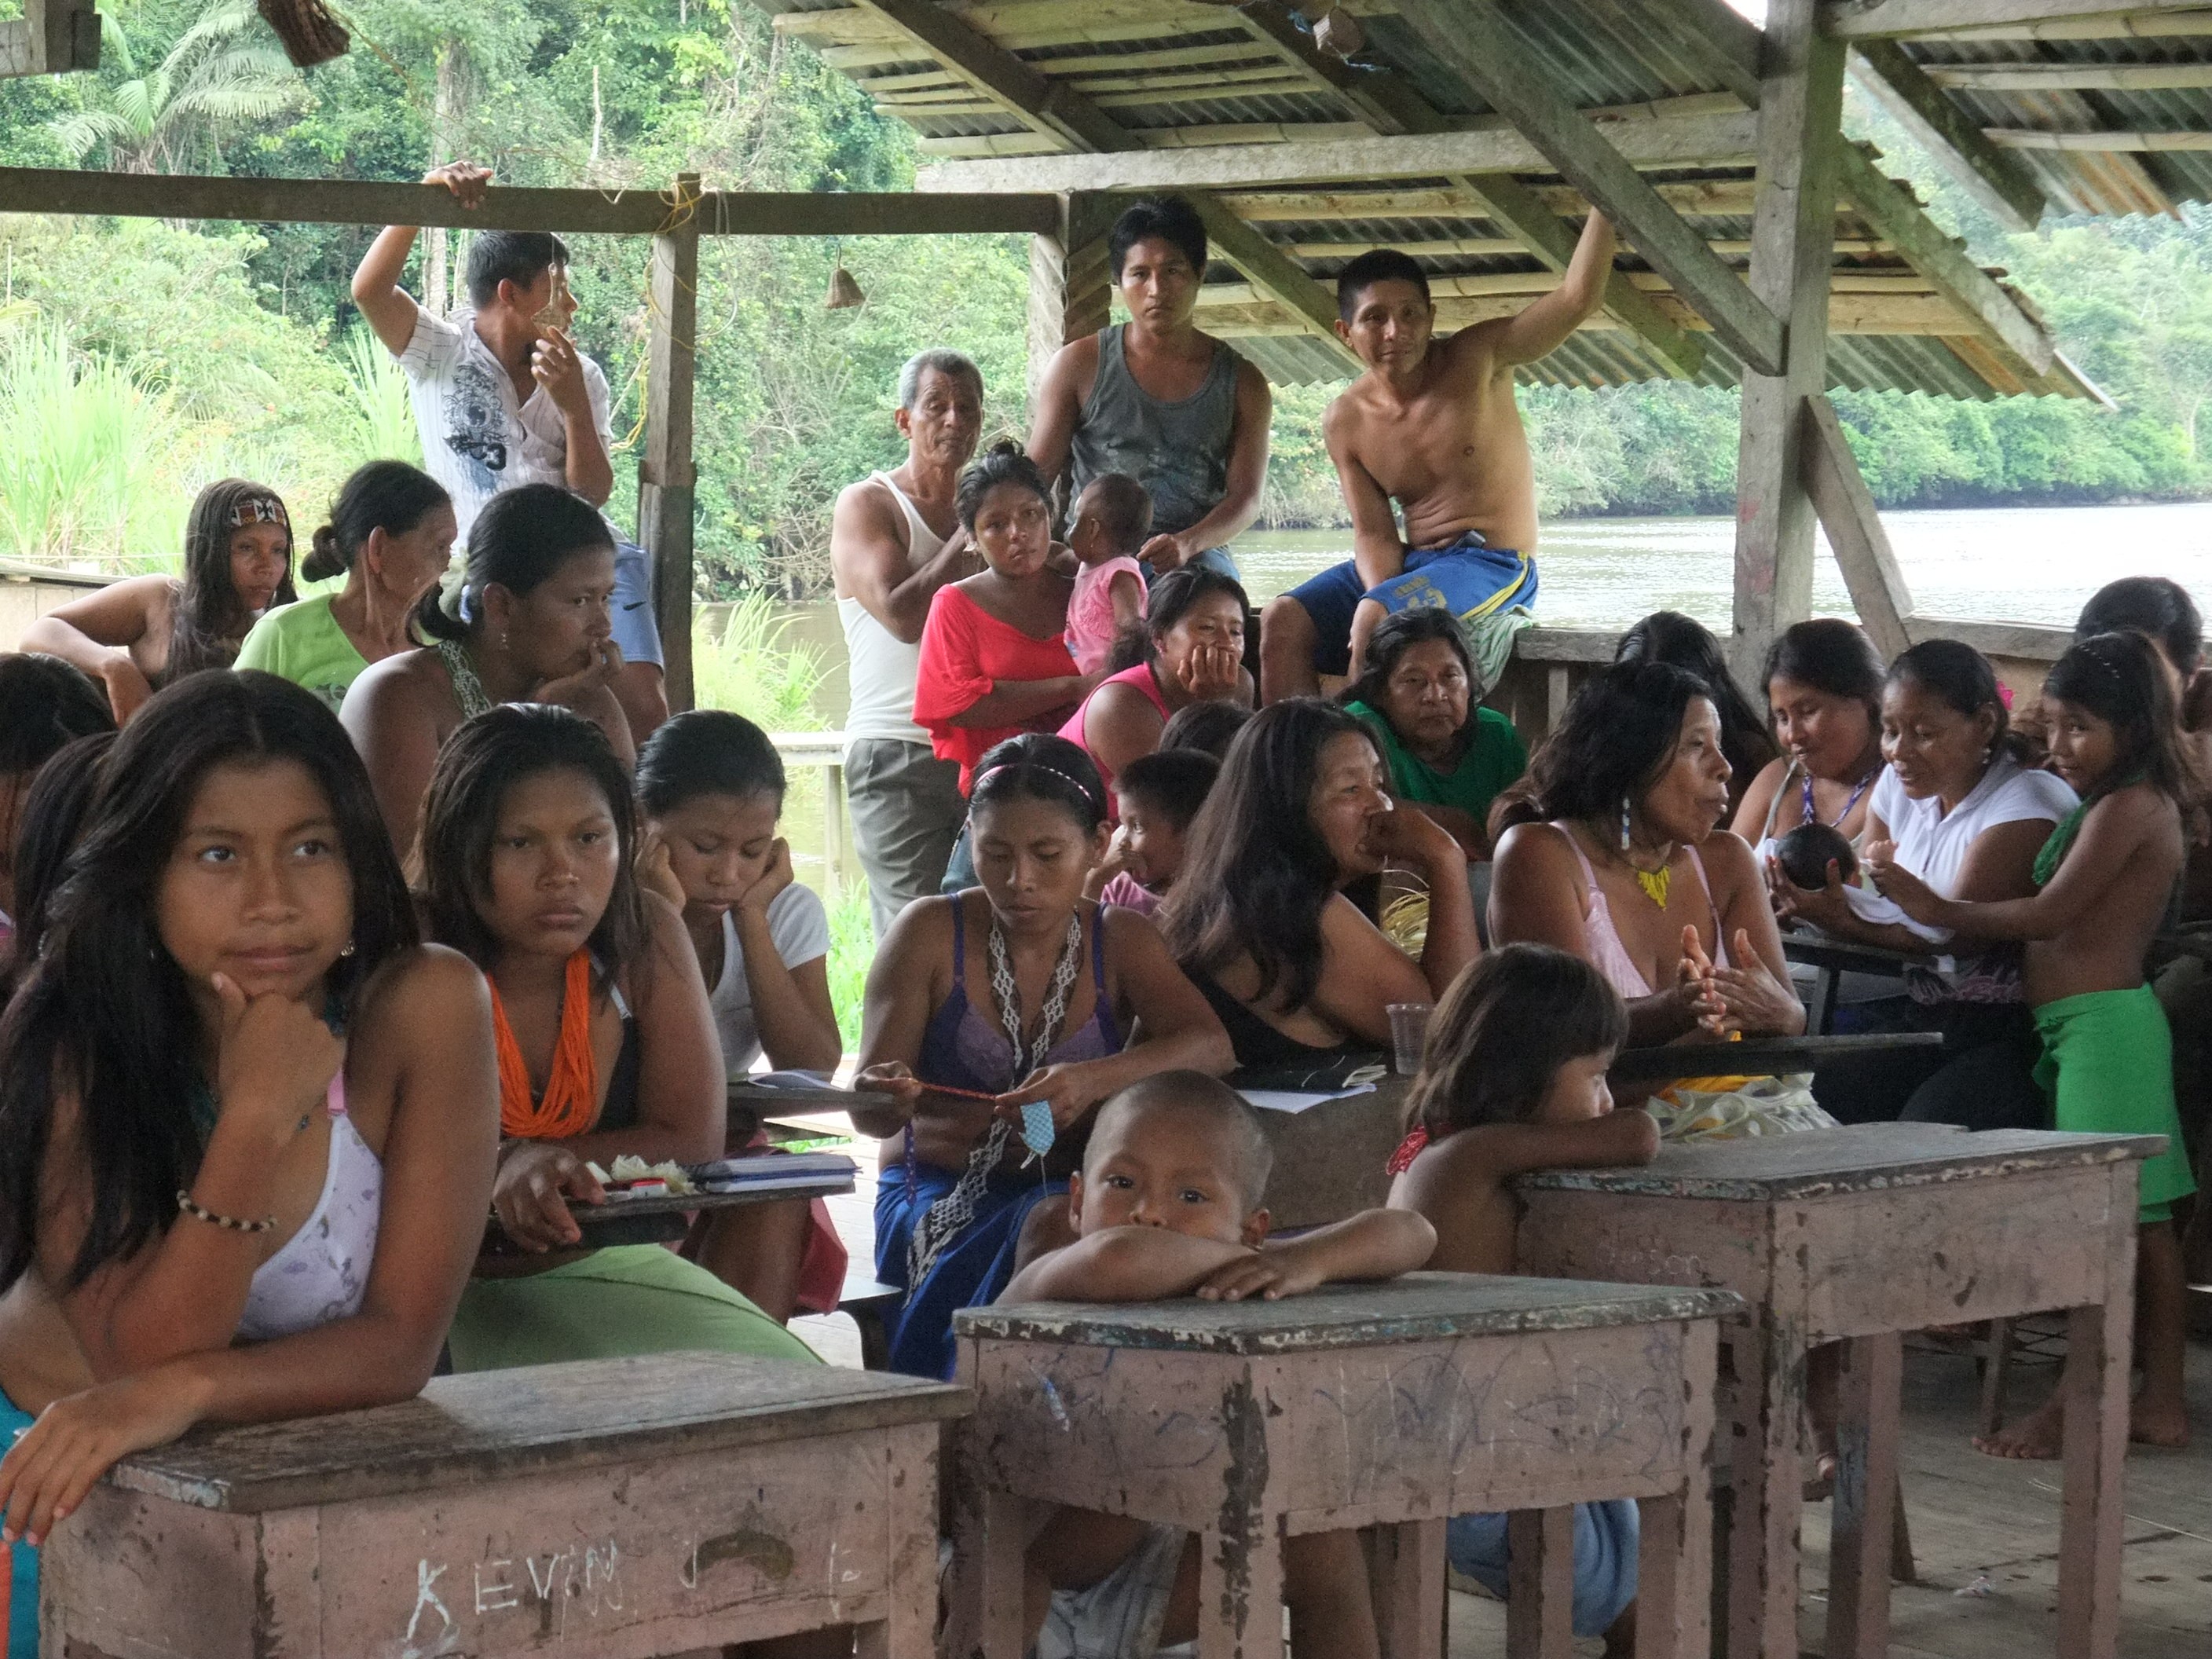 Indigenous women in Colombia-Ecuador border are leading community efforts  to end violence against women